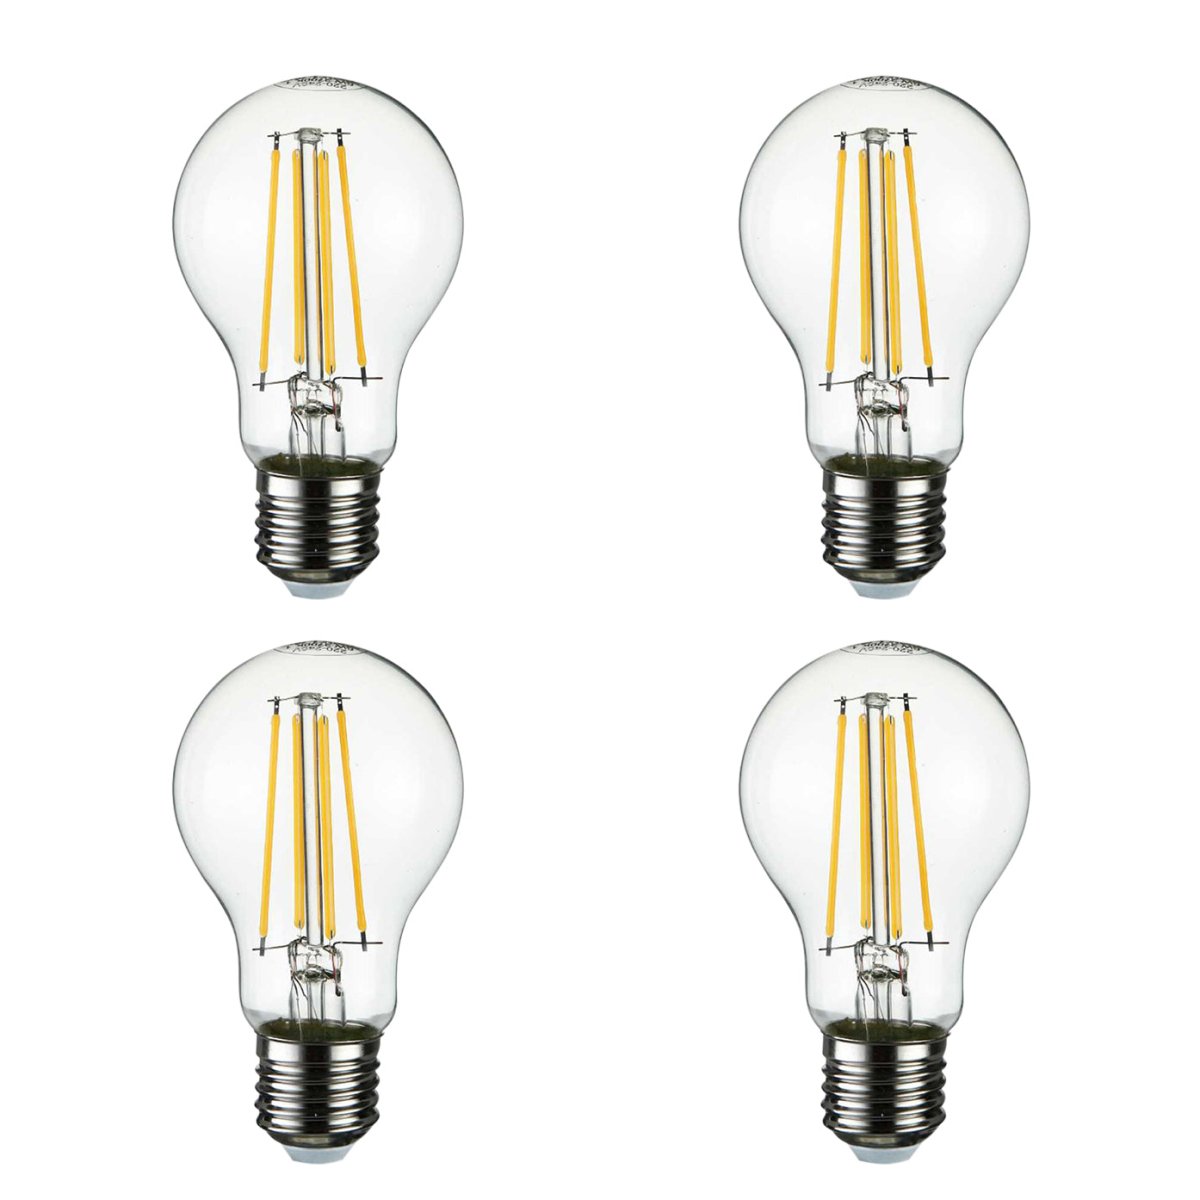 Main image of LED Dimmable Filament decorative a60 gls  bulb e27 edison screw 6.5w warm white 2700k pack of 4